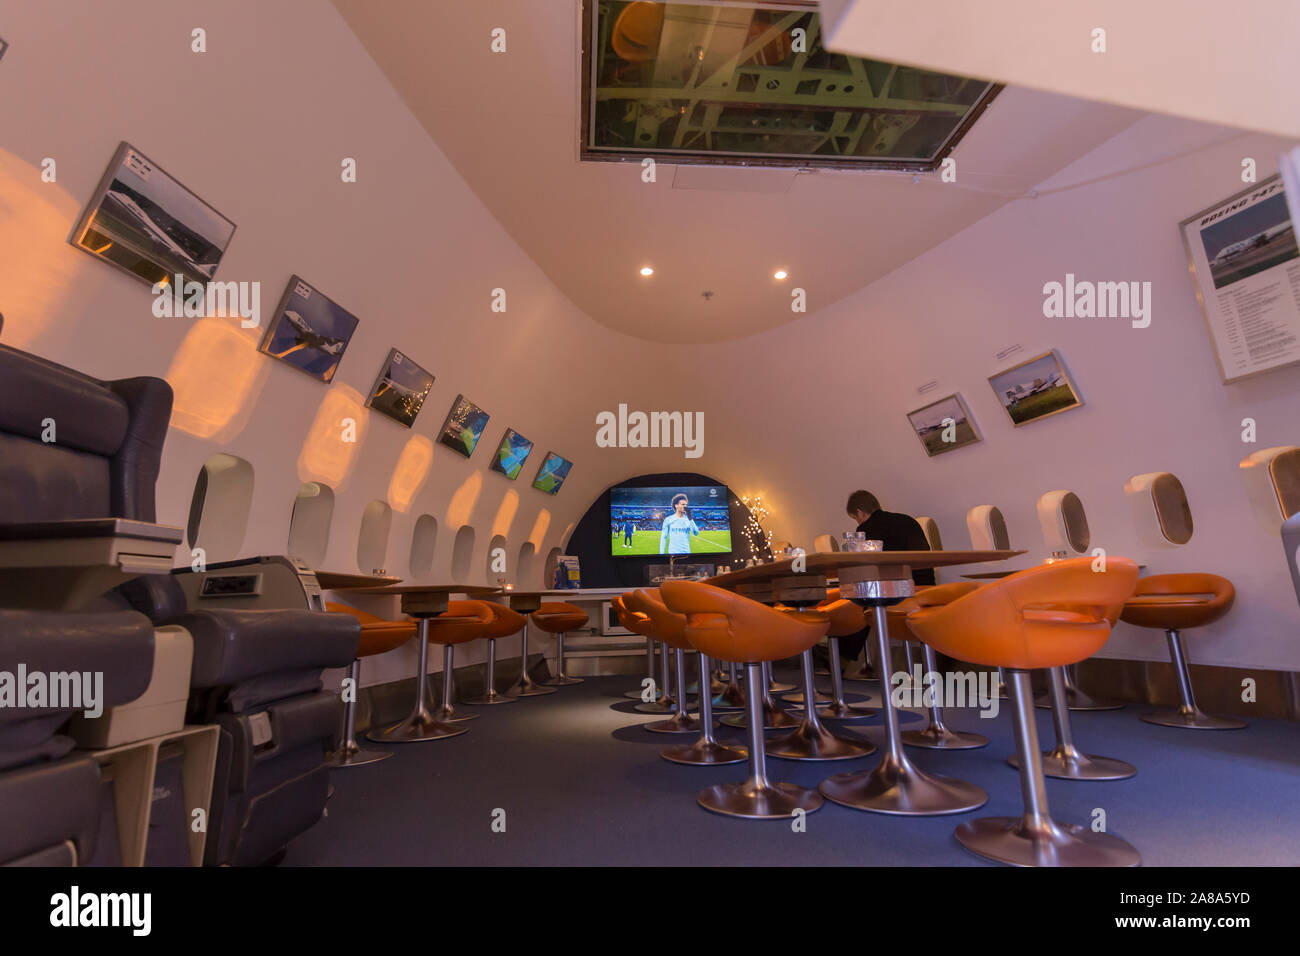 Jumbo Stay breakfast area located in the front of the former boeing 747, Stockholm airport Sweden 2019 Stock Photo